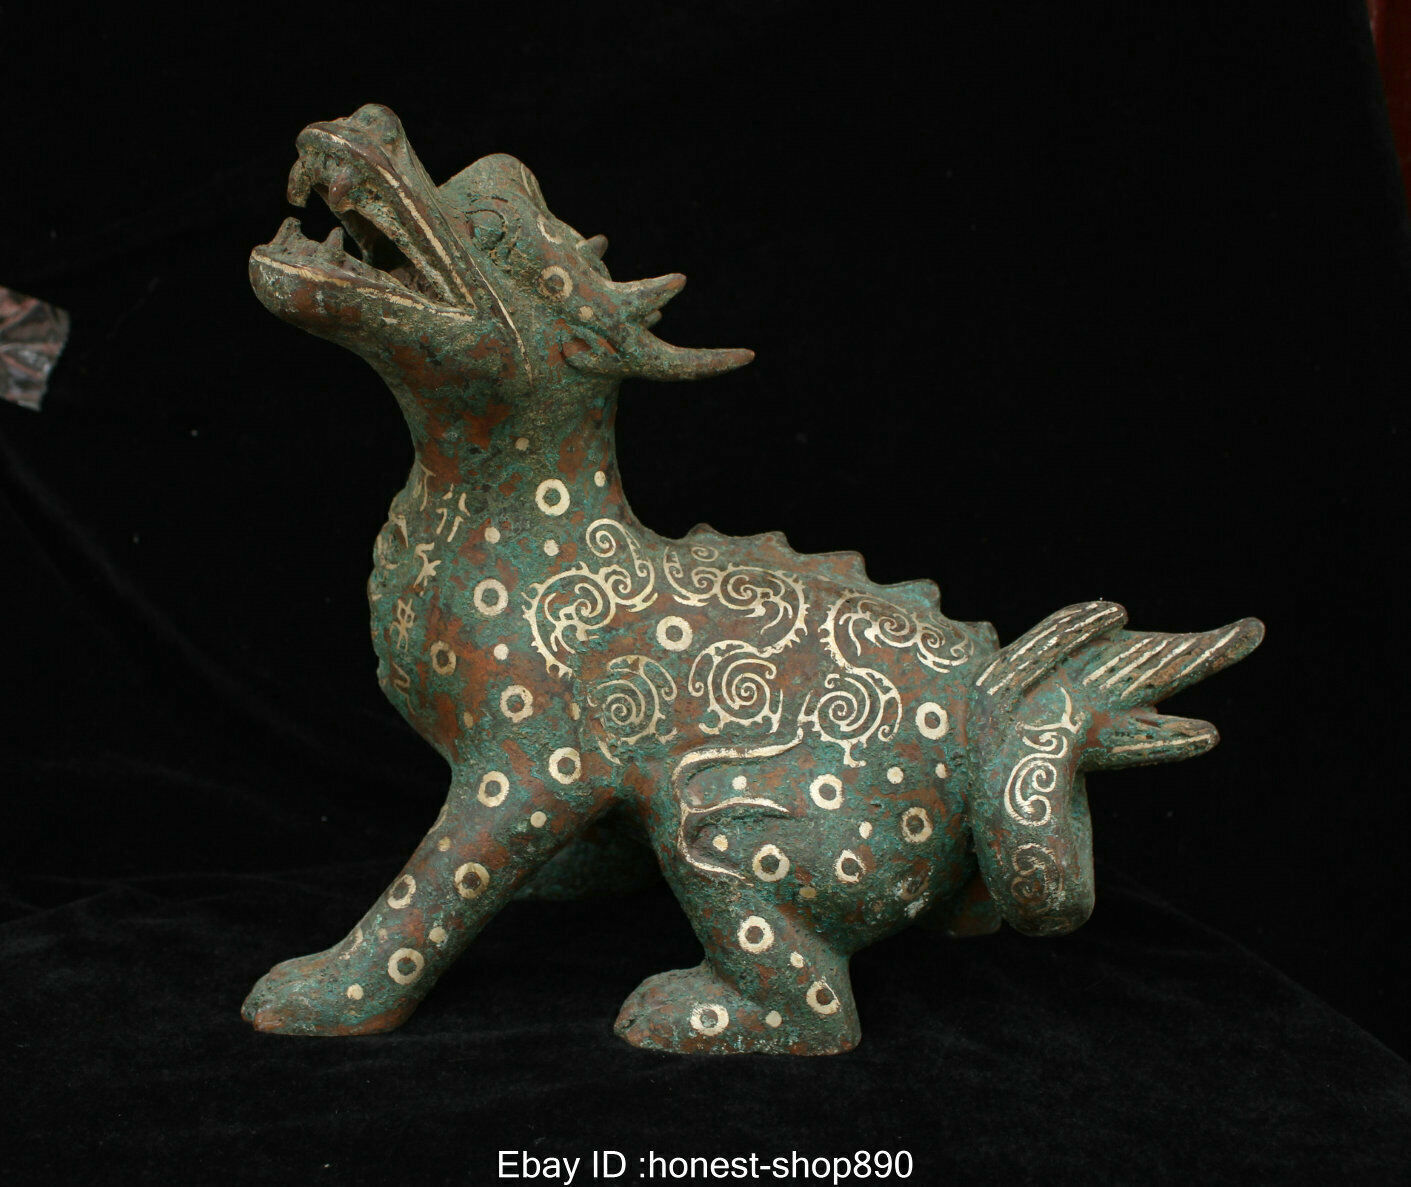 Antique Old China Bronze Ware Silver Animal Wealth Dragon Beast Statue Sculpture